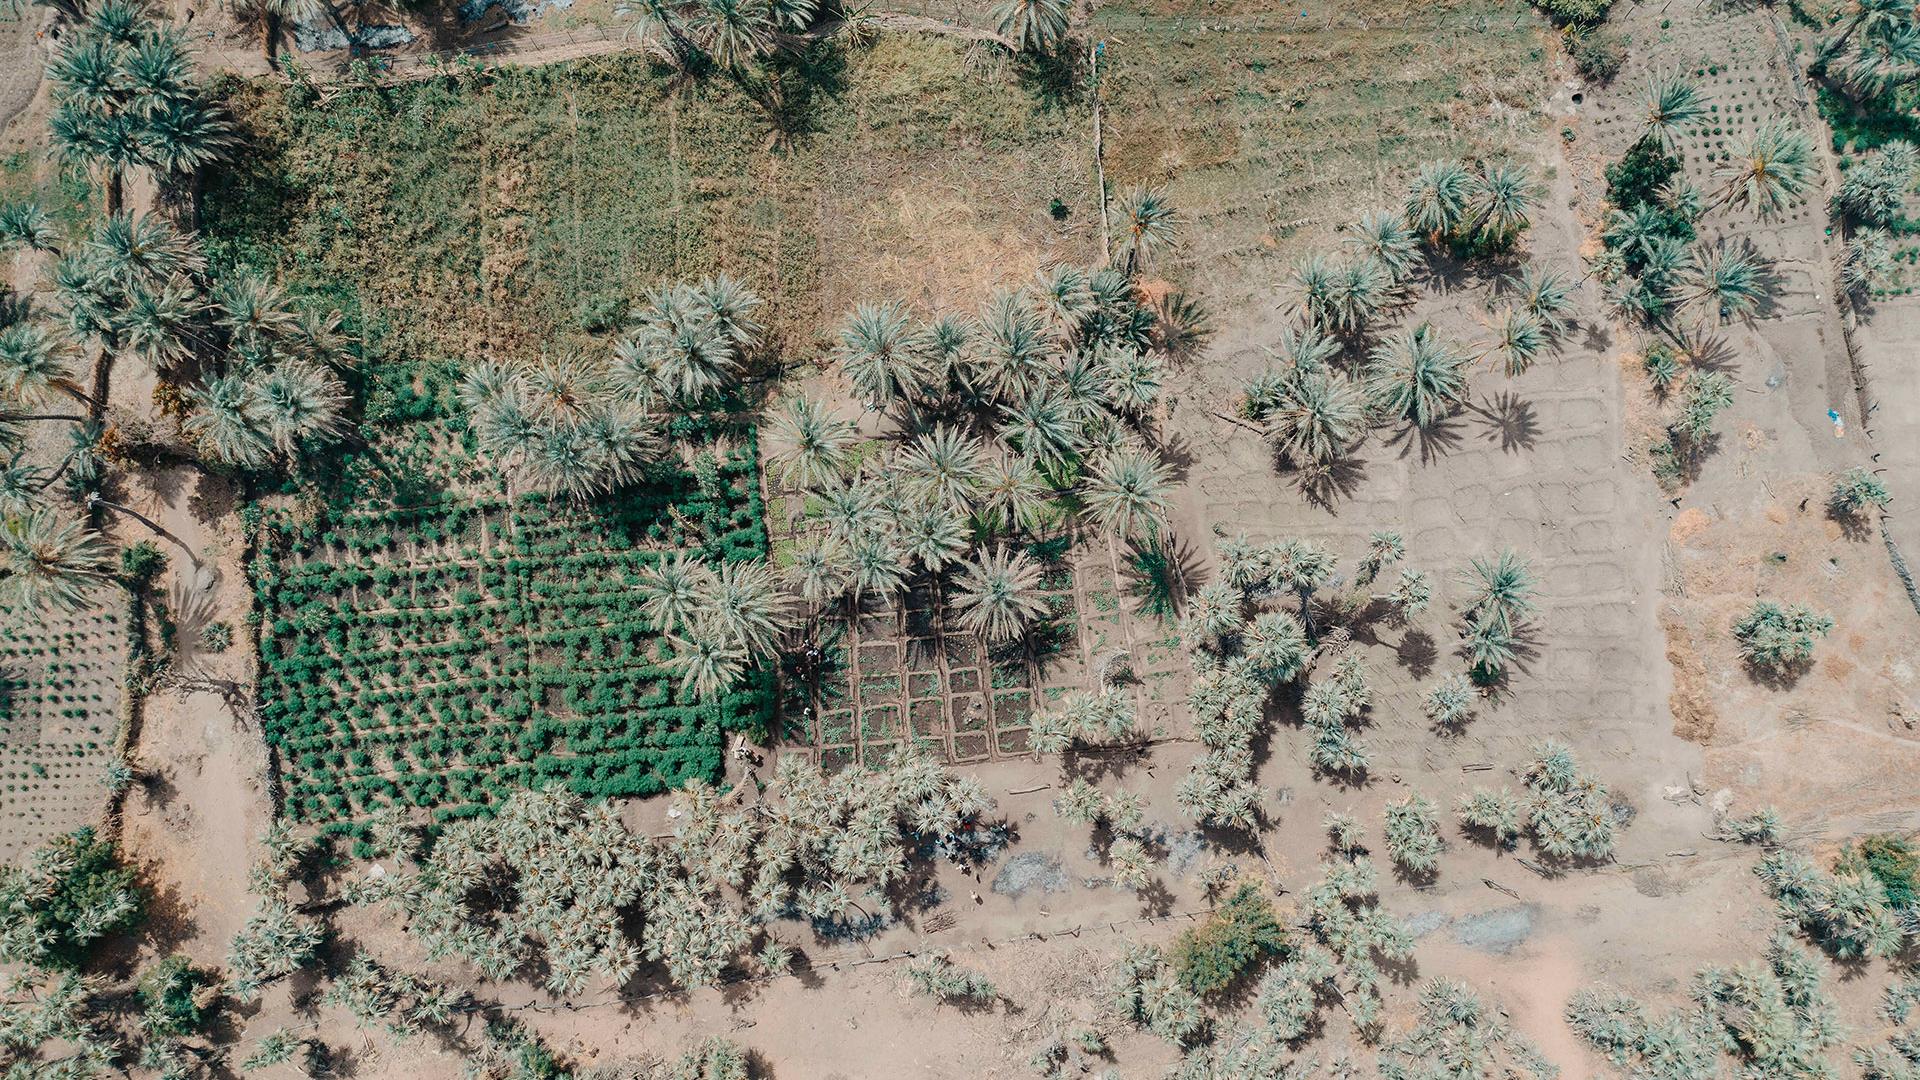 Dalajajiram oasis basin, Niger, with moringa plants on the left and salad plants on the right. The PASAM project, financed by AFD, aims to improve food security by combating silting and restoring the basins through agro-ecological intensification of production.